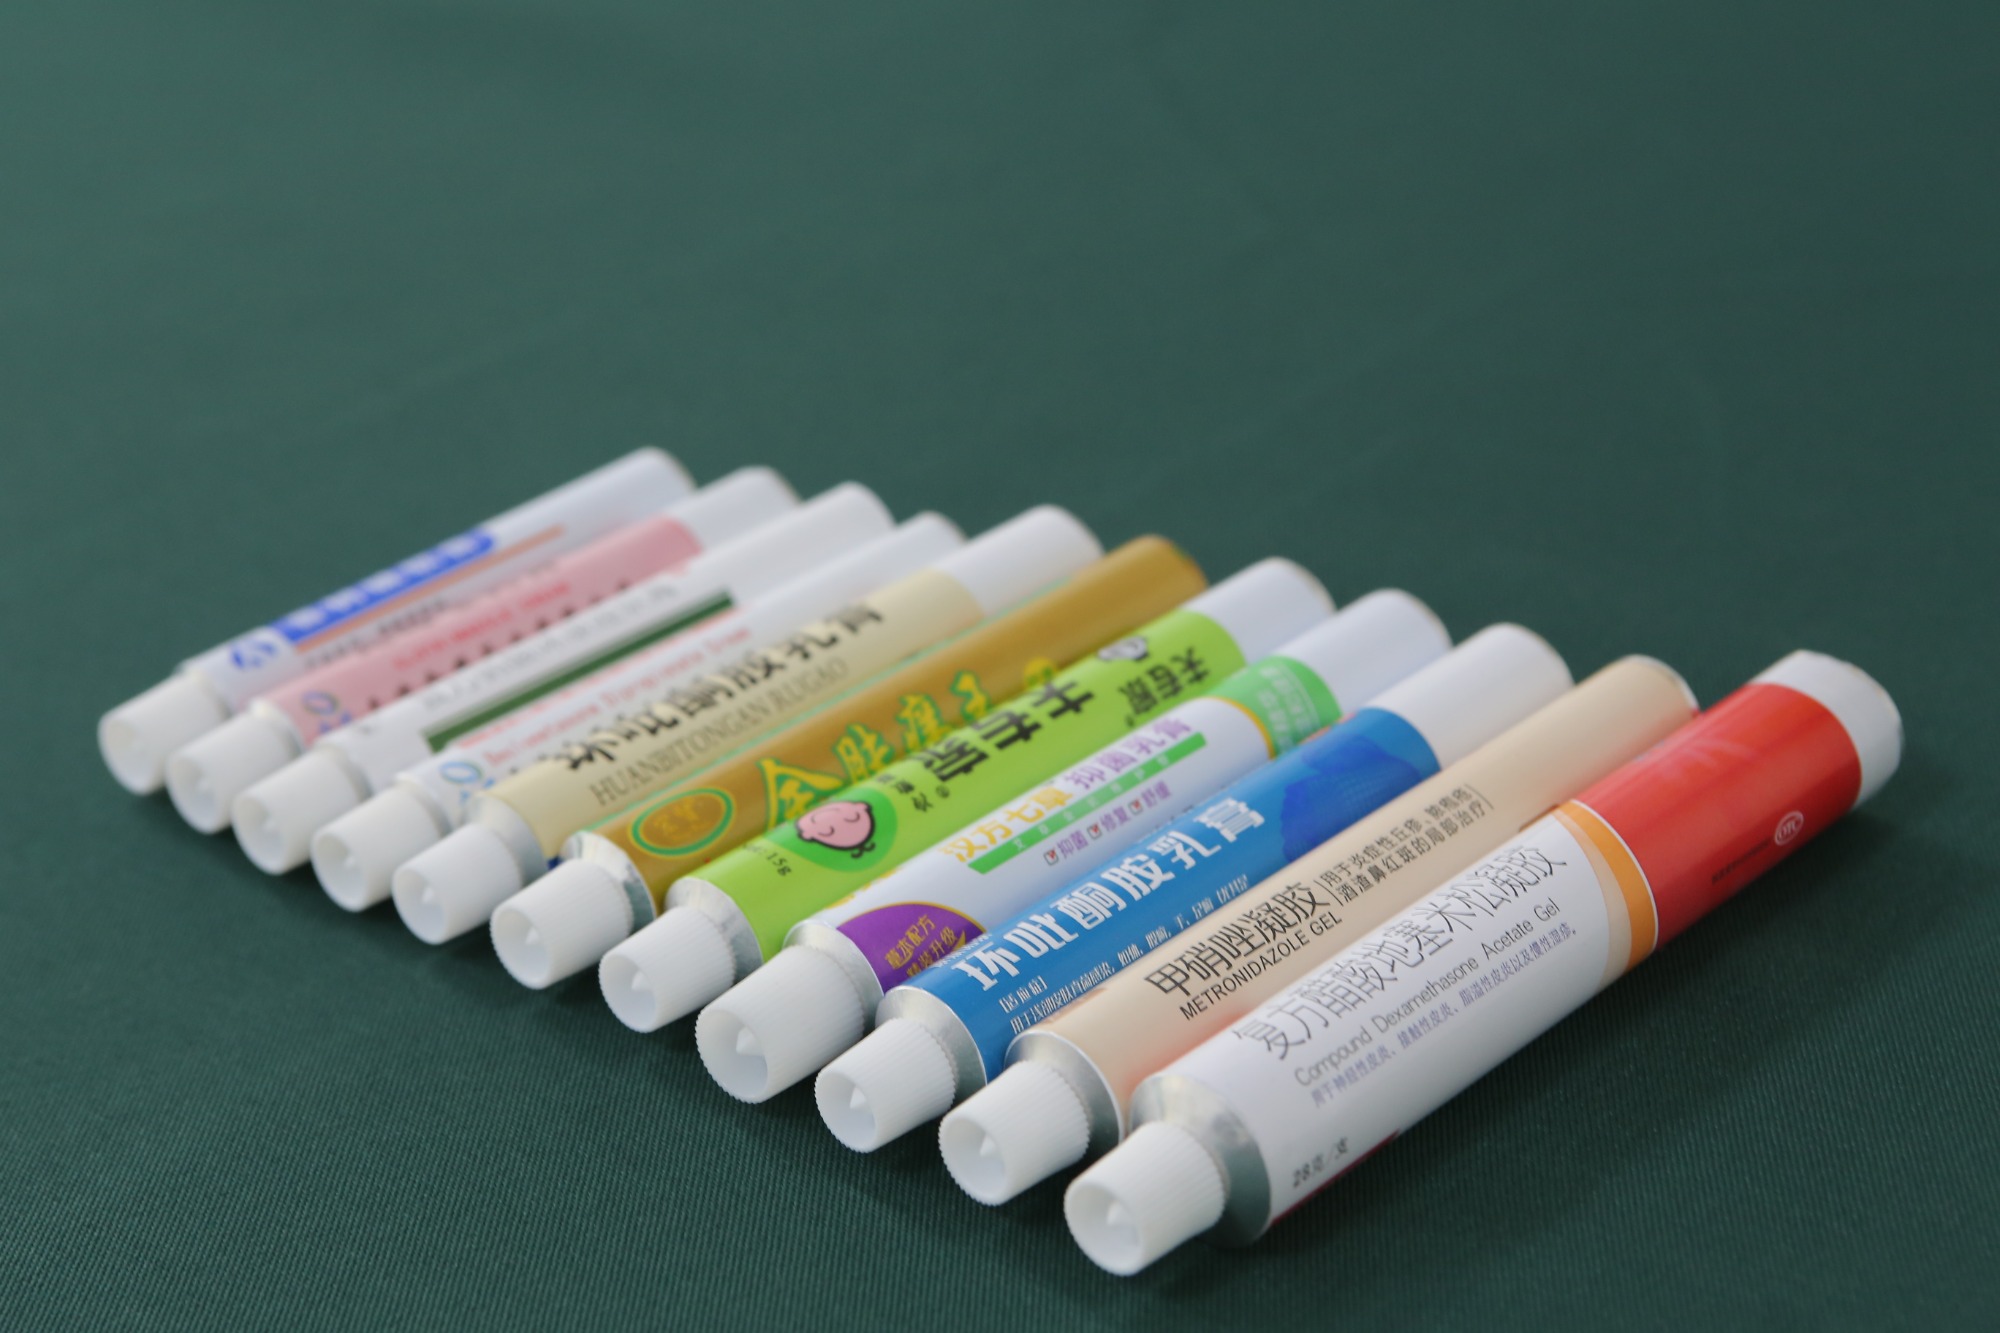 Medicinal Ointment & Cream Tubes Packaging Requirements